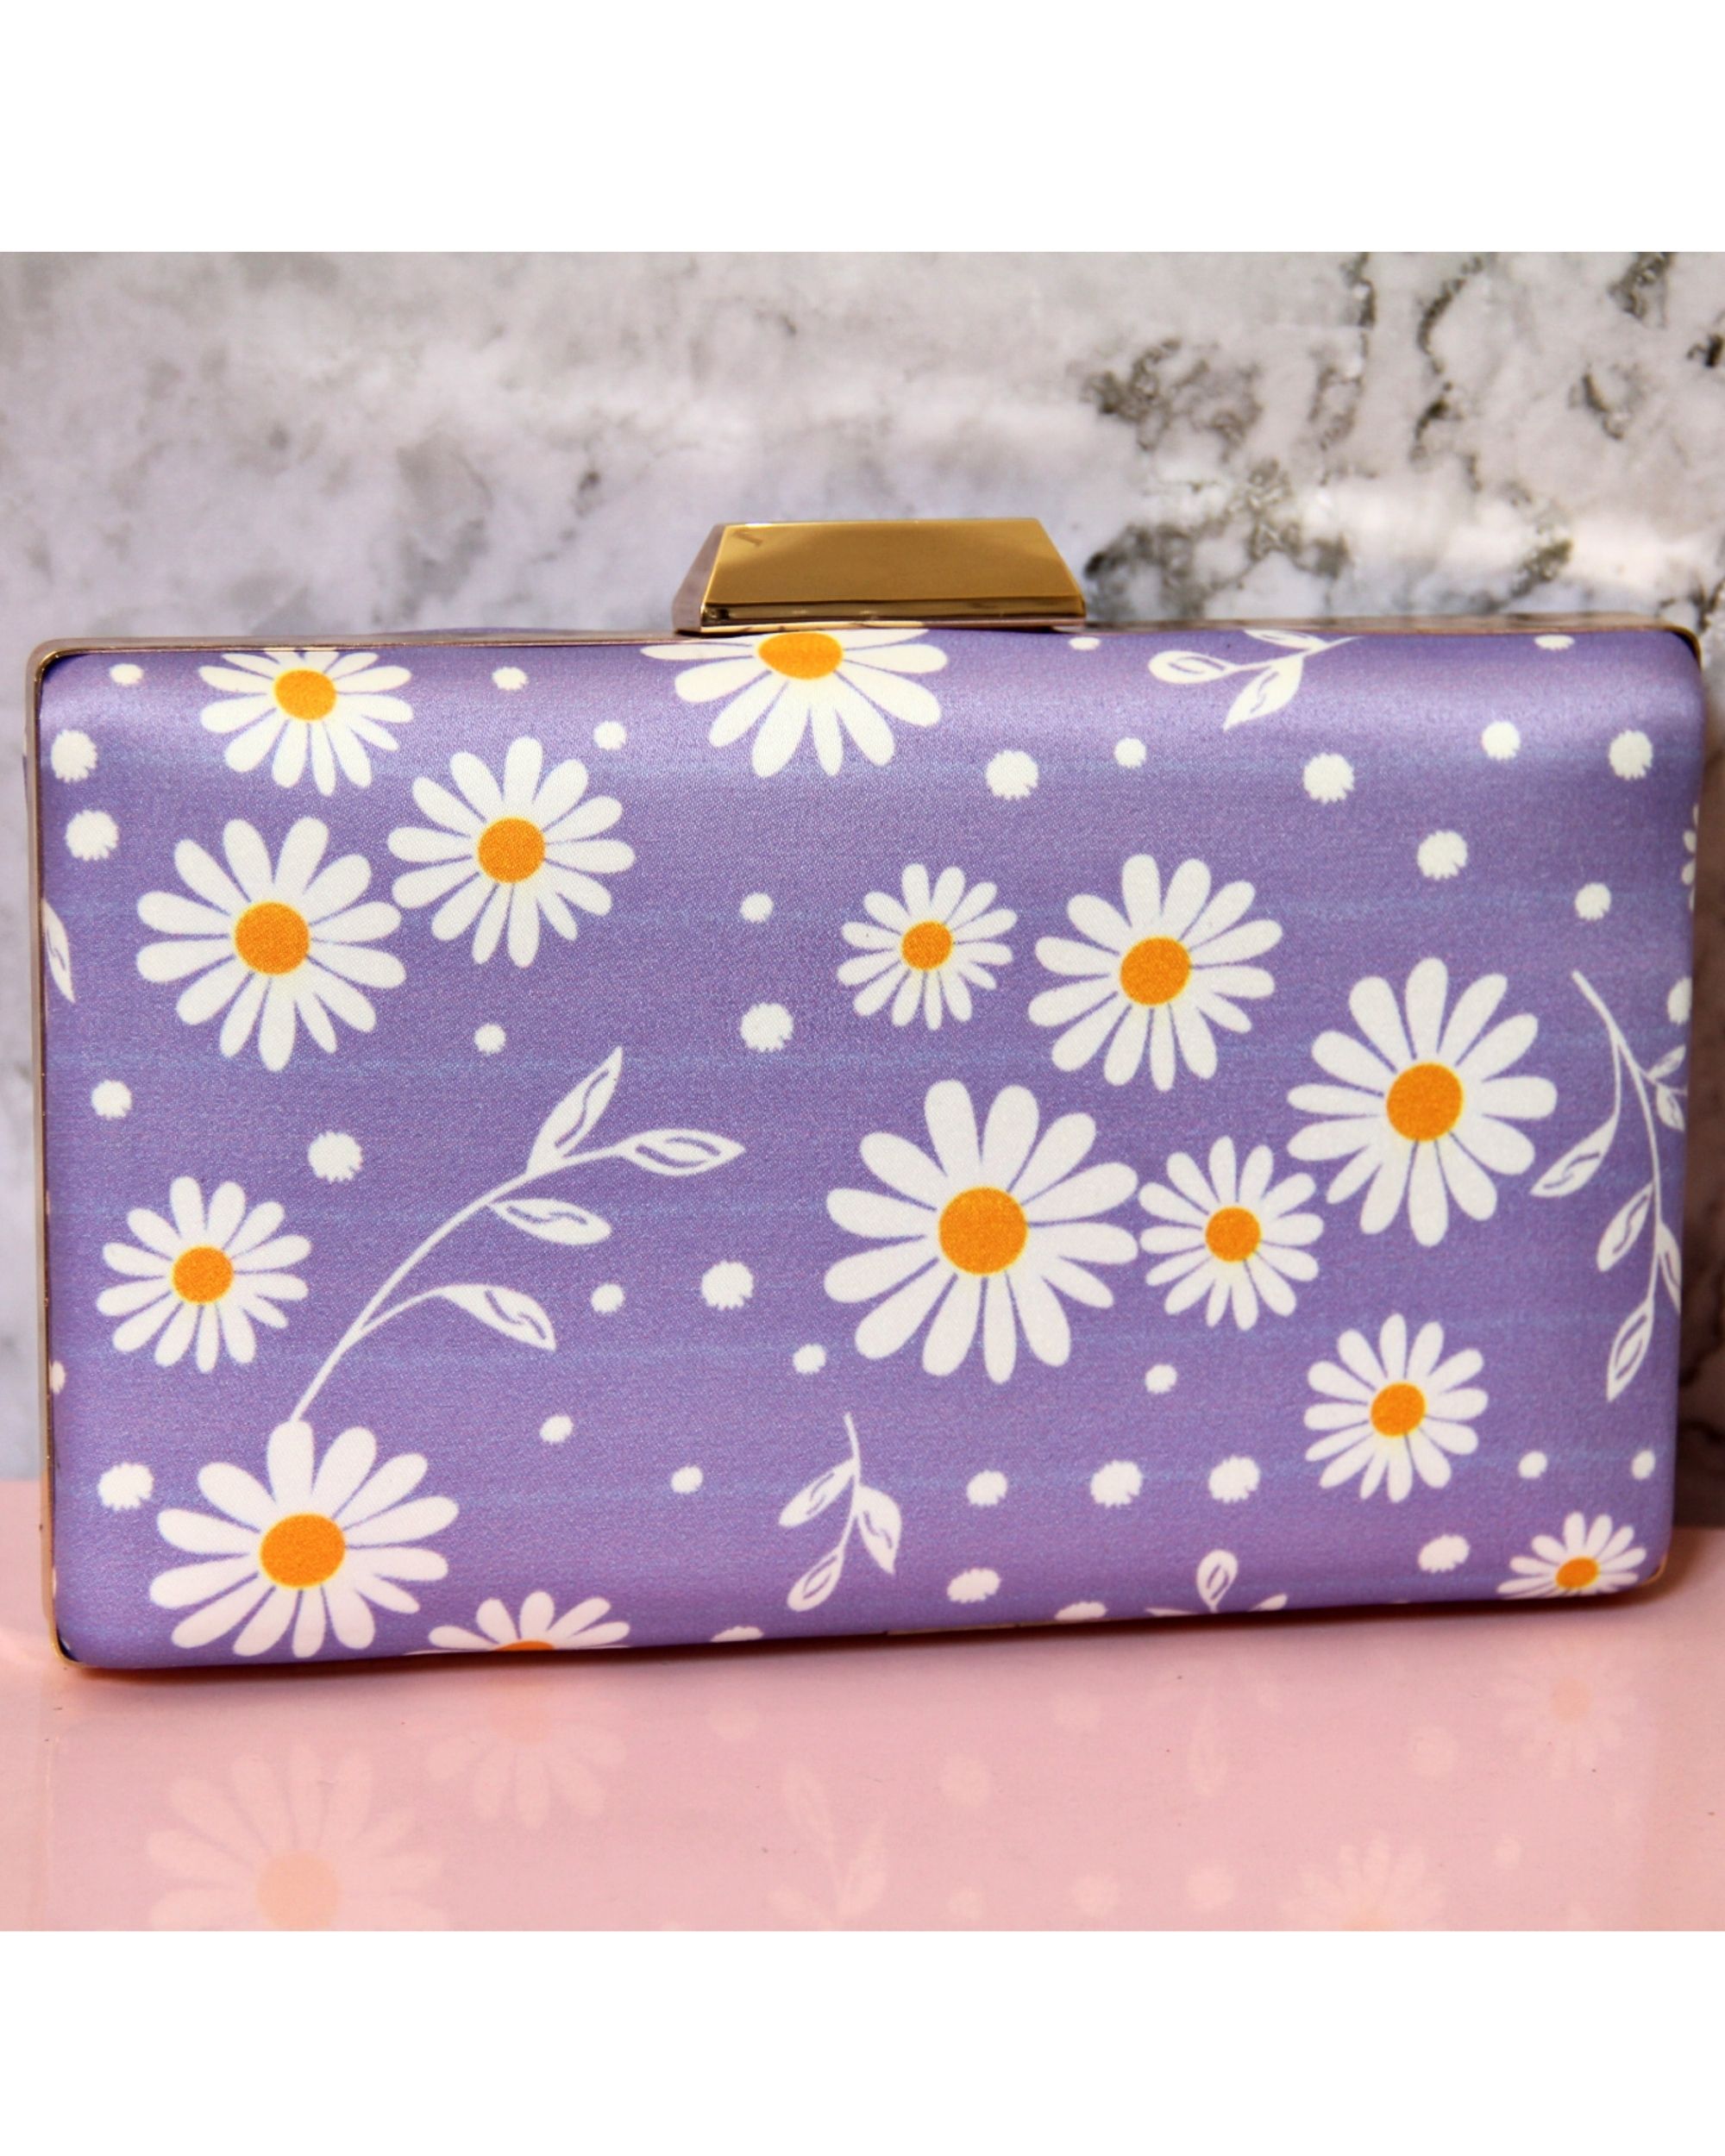 Floral Crystal Clutch Purse | Little Luxuries Designs